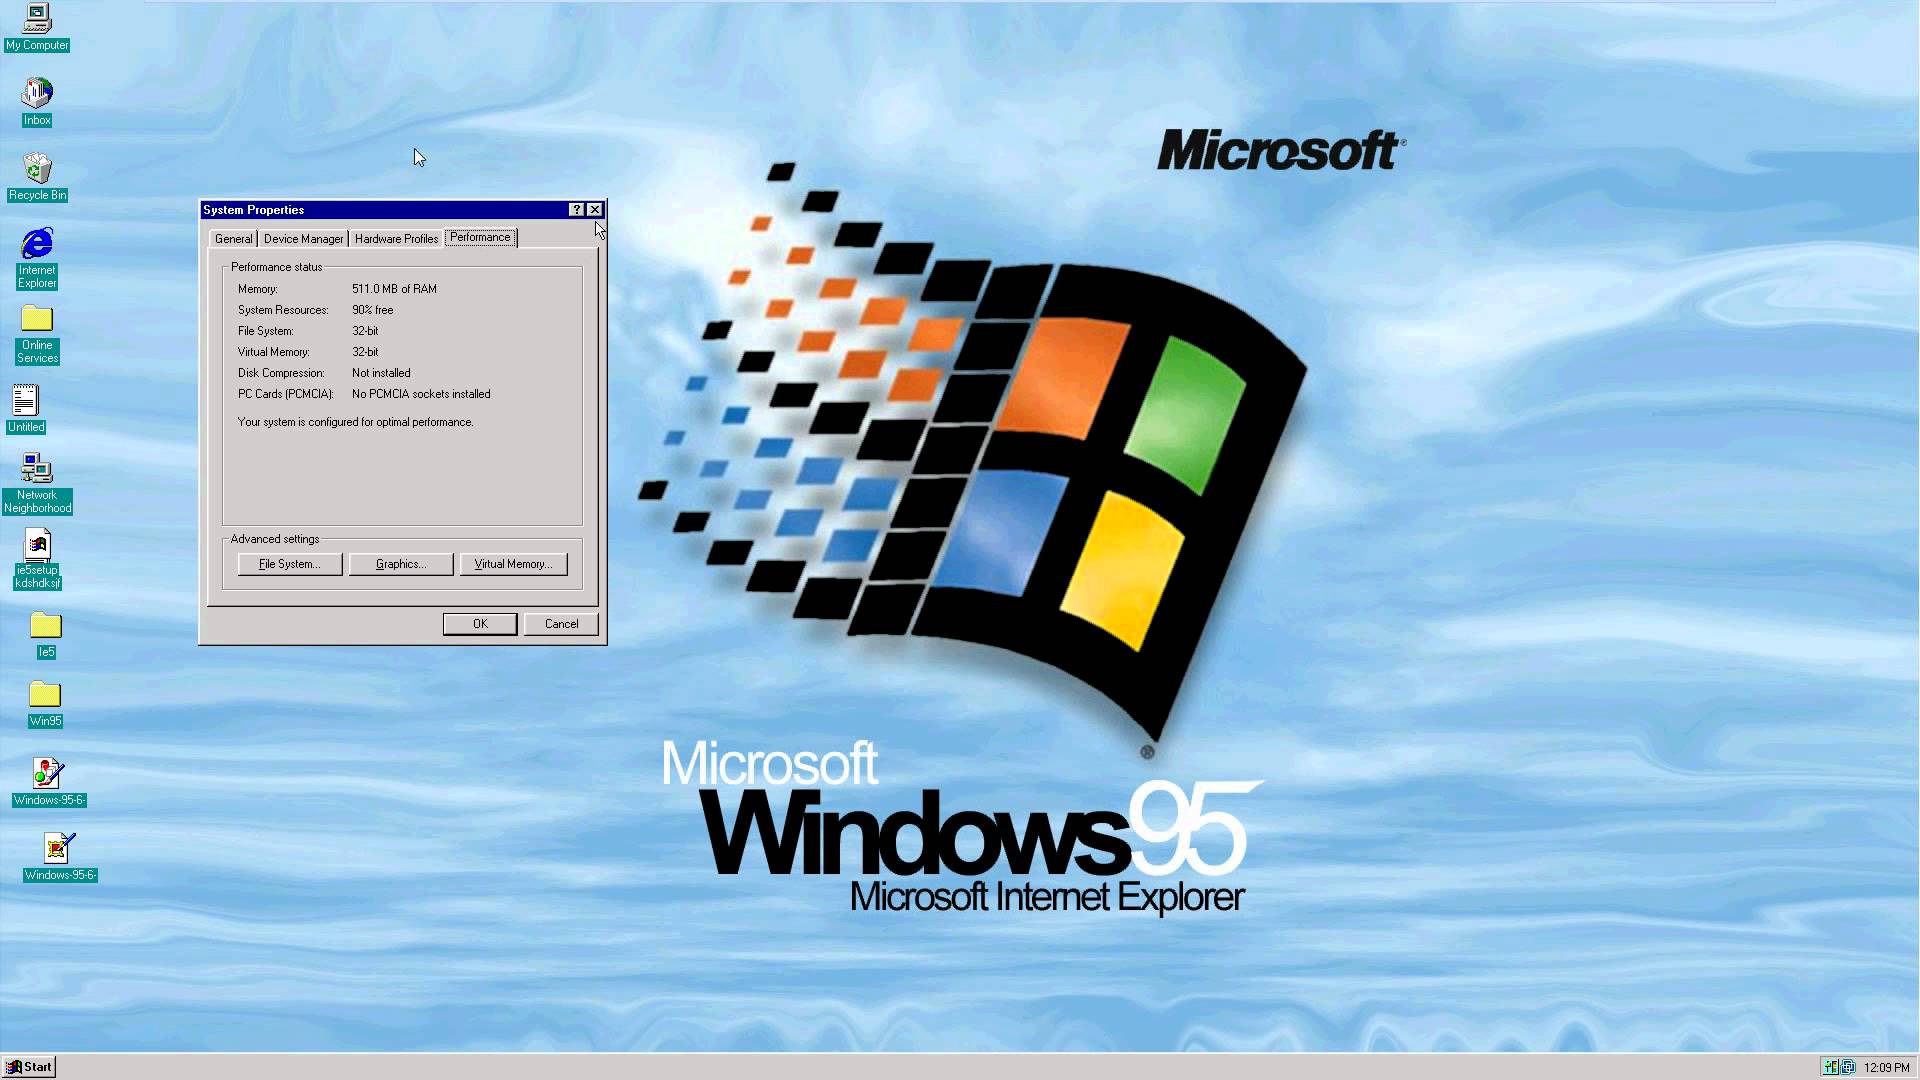 Windows 95 is the best operating system - Windows 95